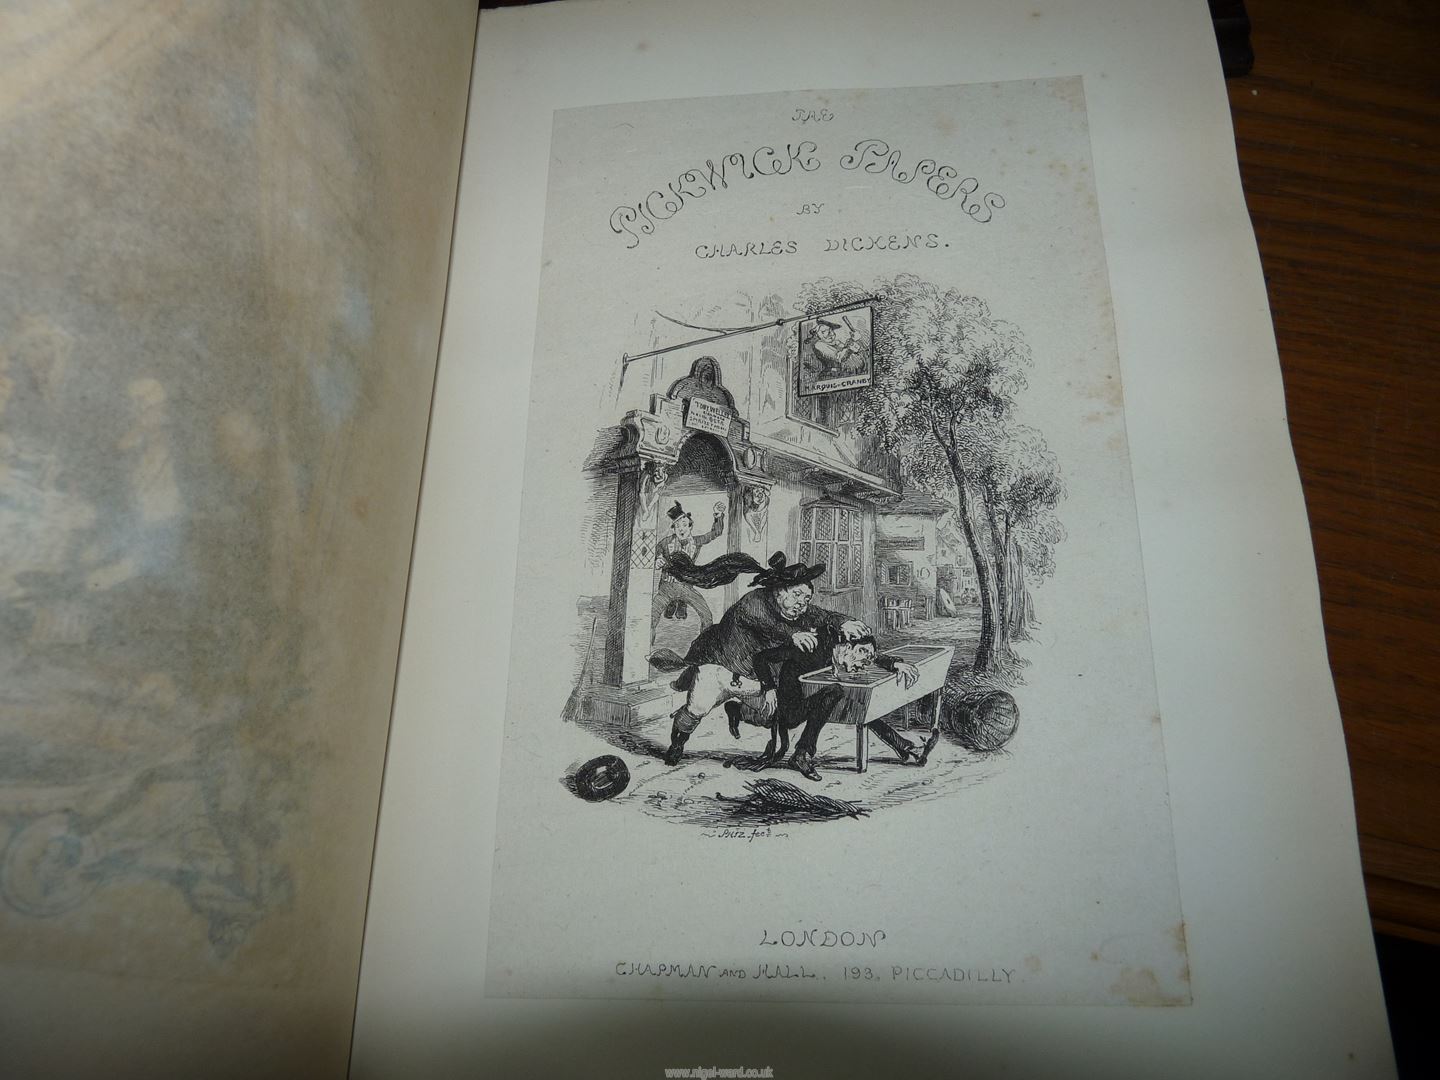 'The Works of Charles Dickens' a limited edition (47/1000) of 30 volumes printed by Chapman and - Image 6 of 6